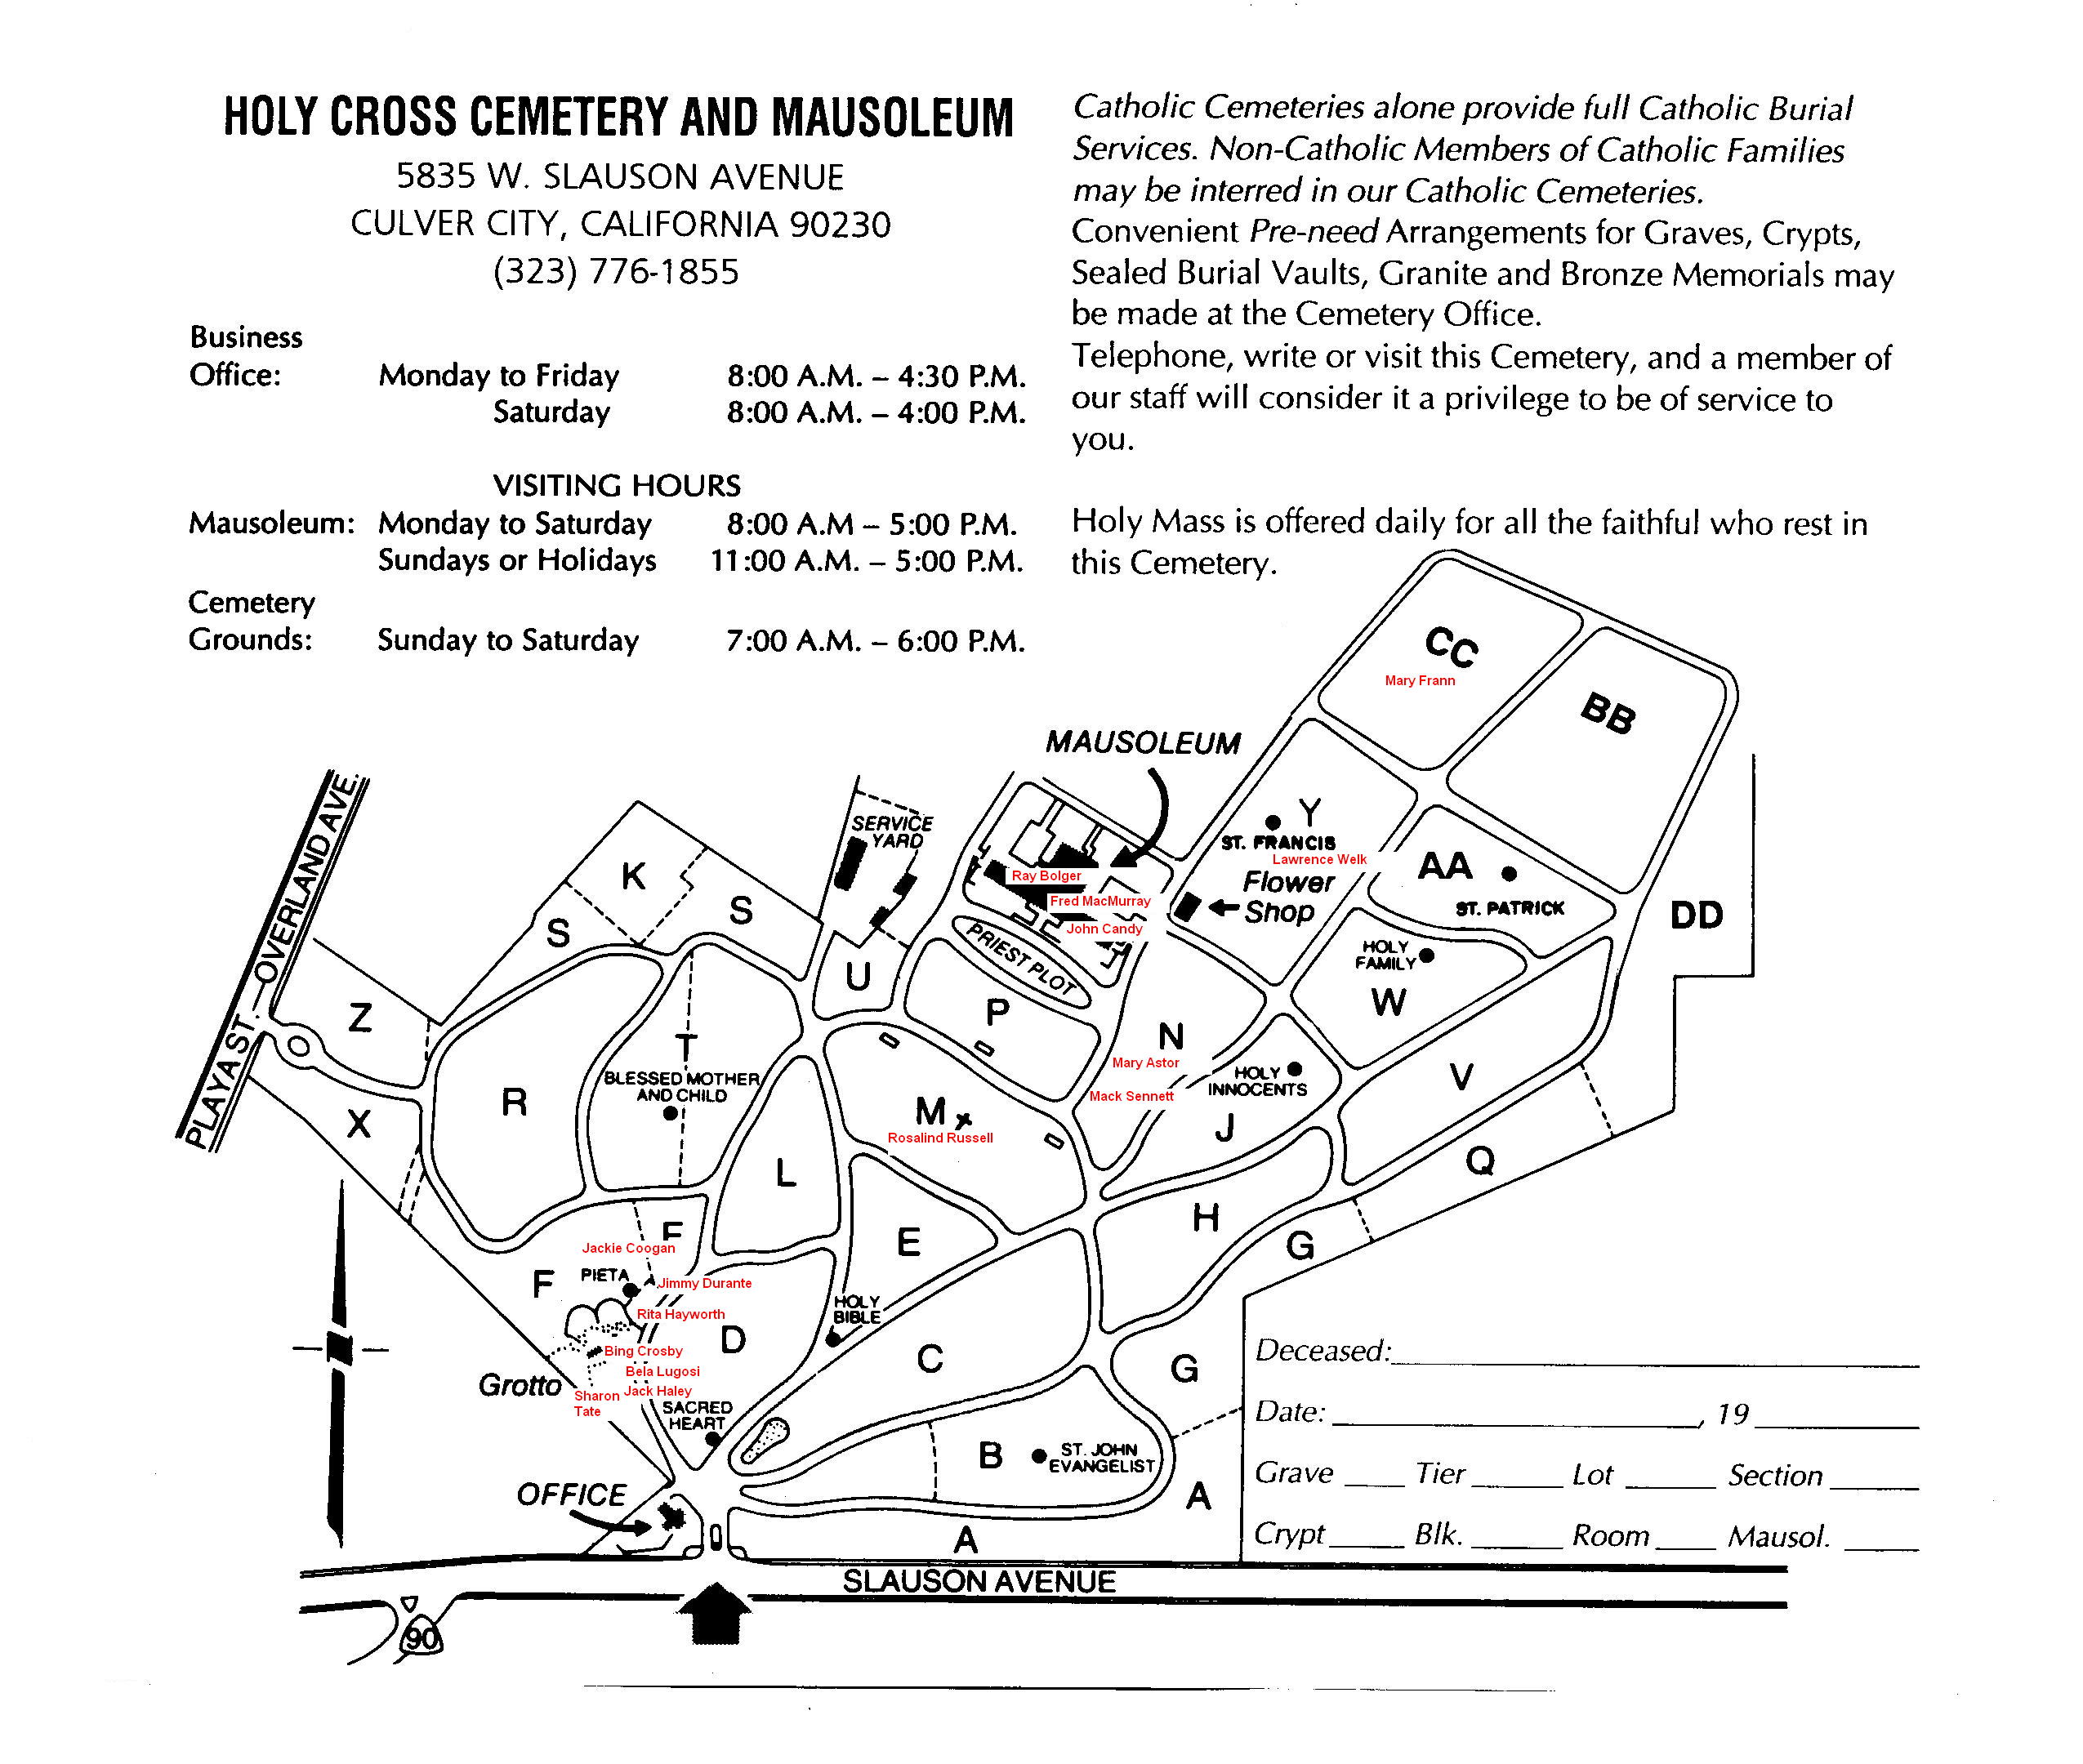 Cemetery map of Holy Cross Cemetery in Culver City, California.